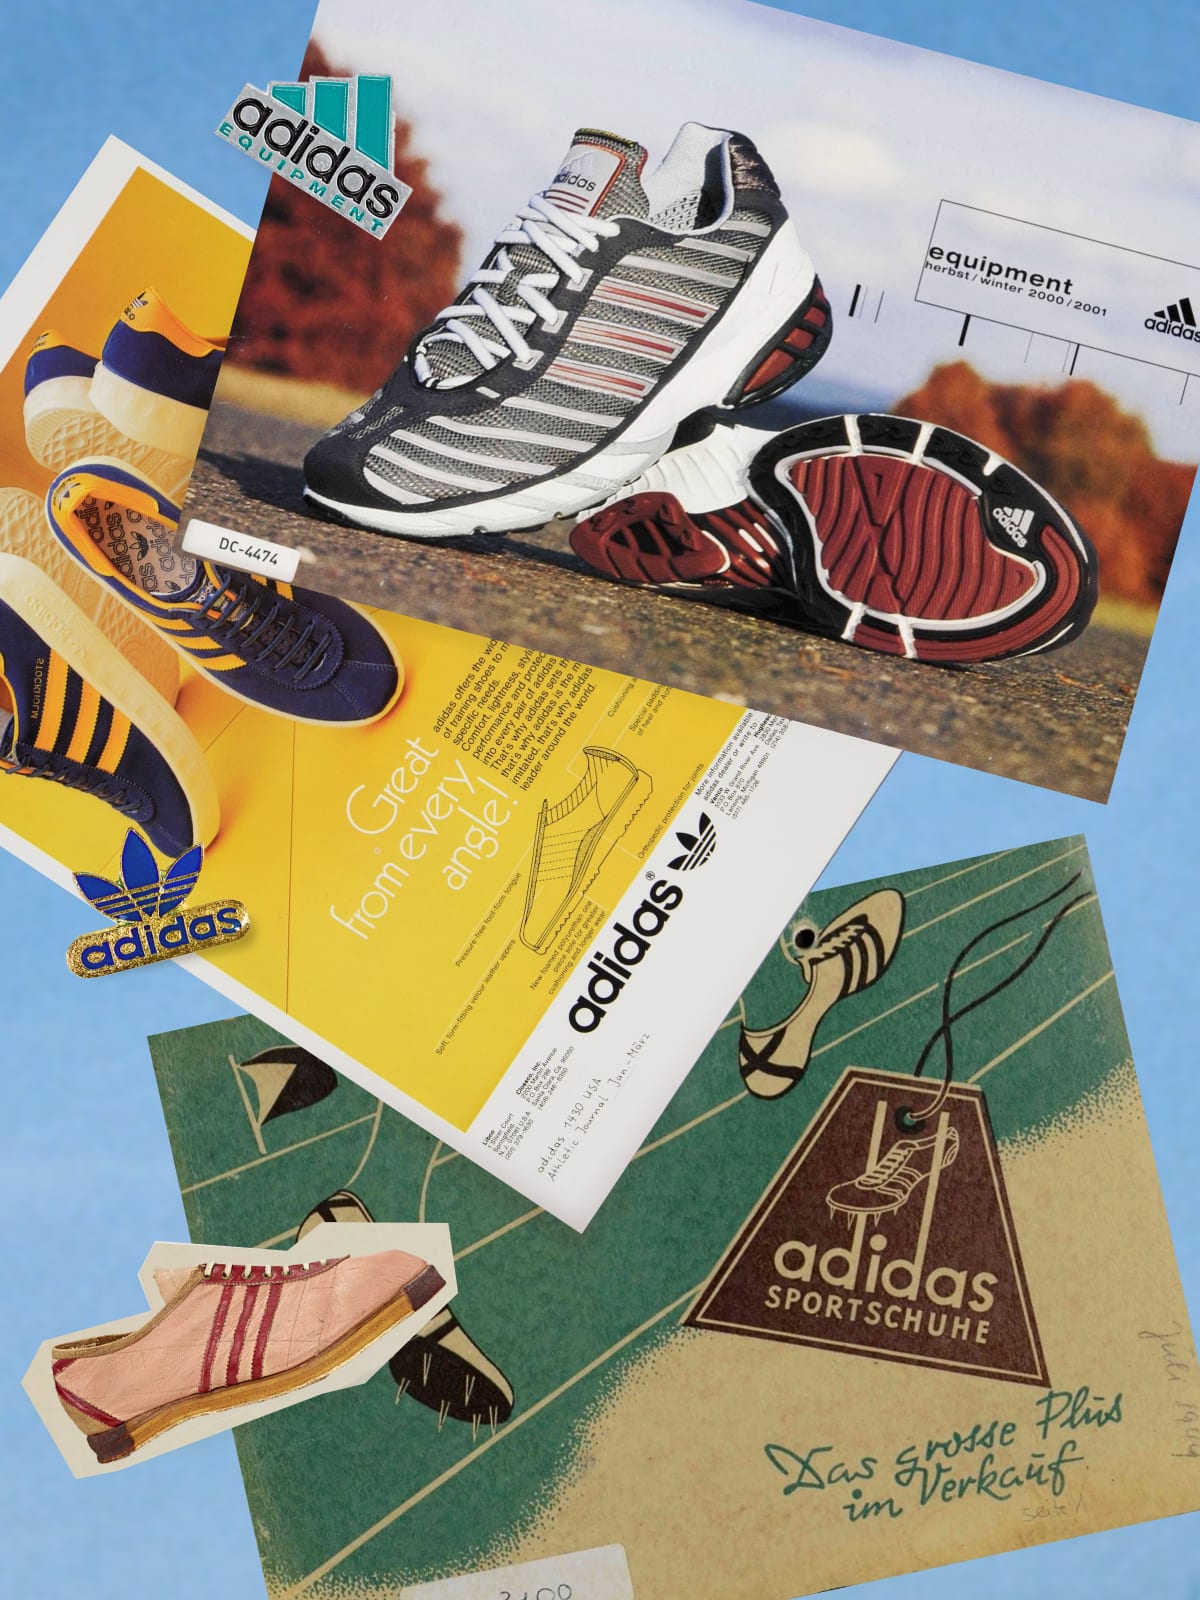 Donder Zwitsers verrader adidas Logos: History and Meaning